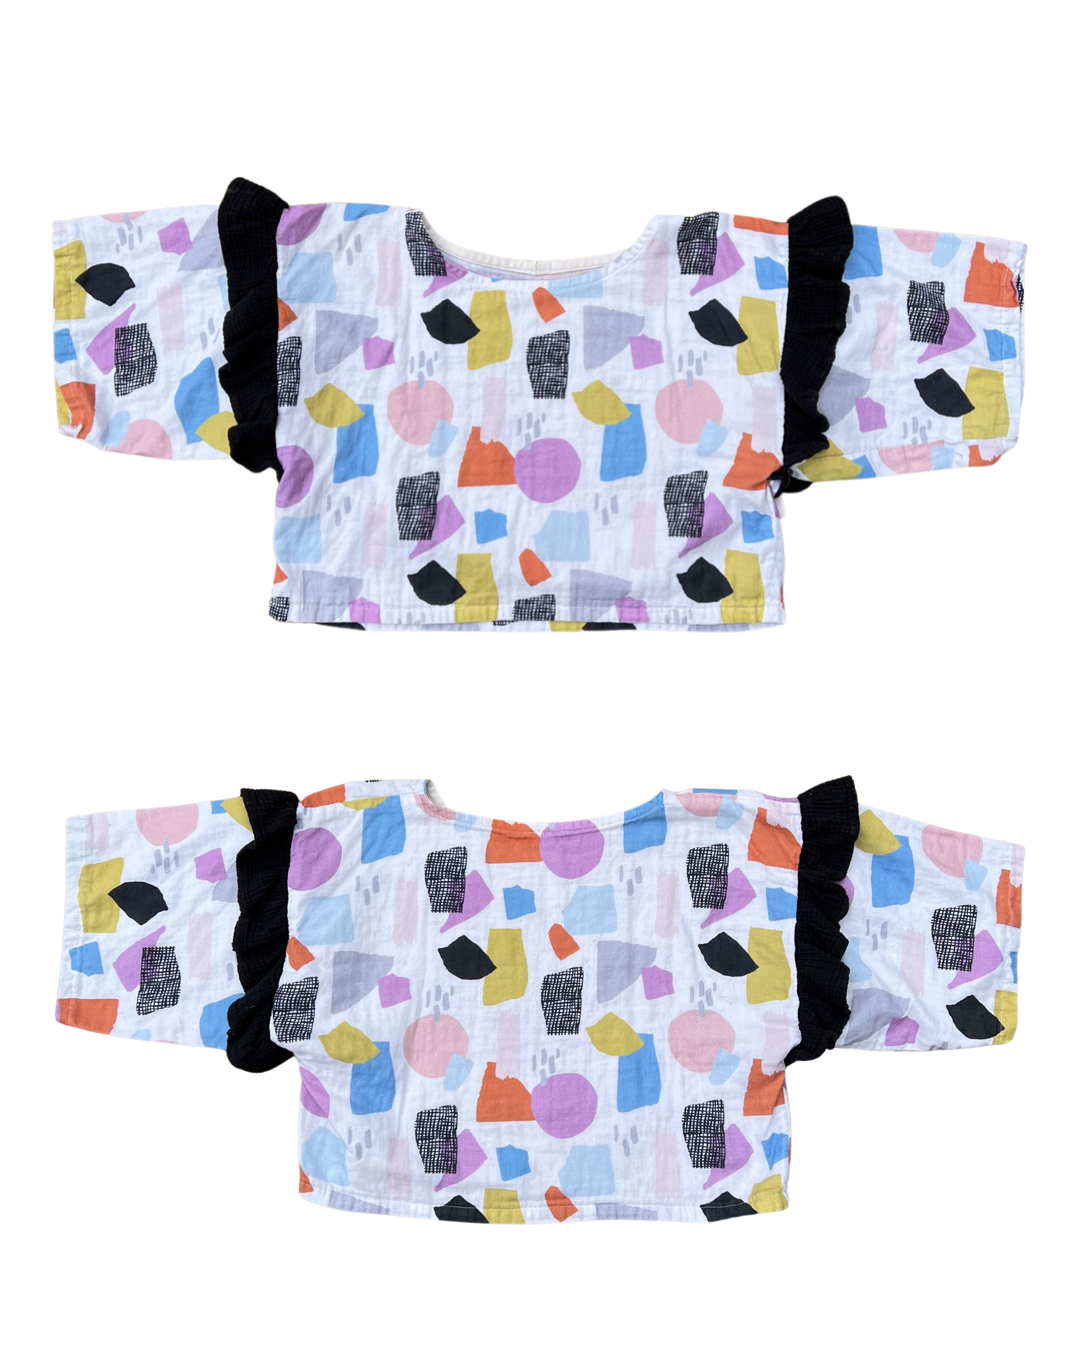 Handmade Quirky Geometric Colorpop Blouse - Large